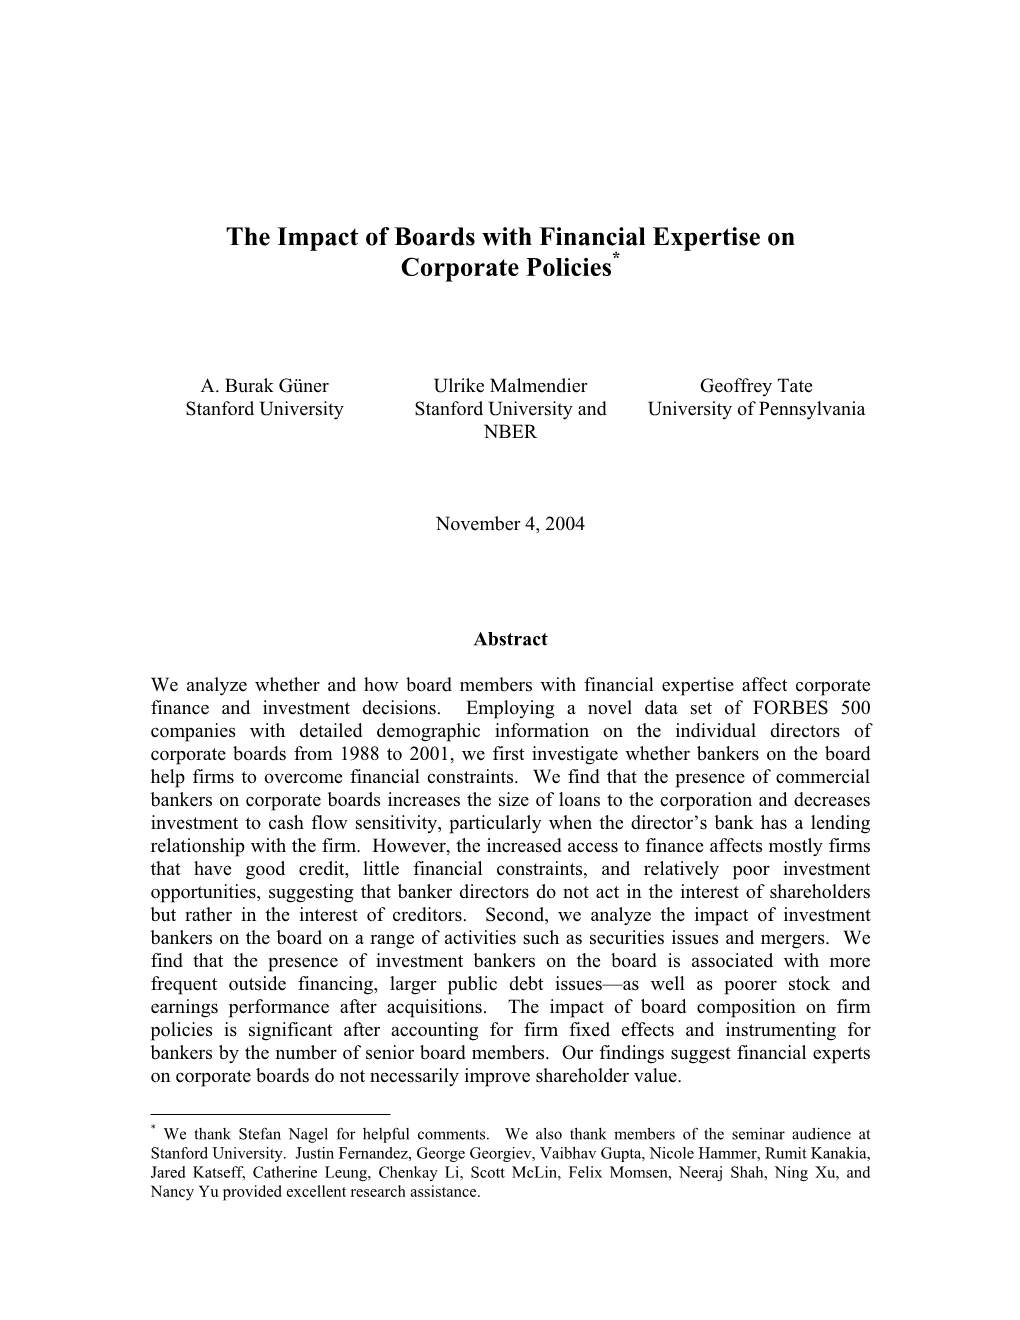 The Impact of Boards with Financial Expertise on Corporate Policies*